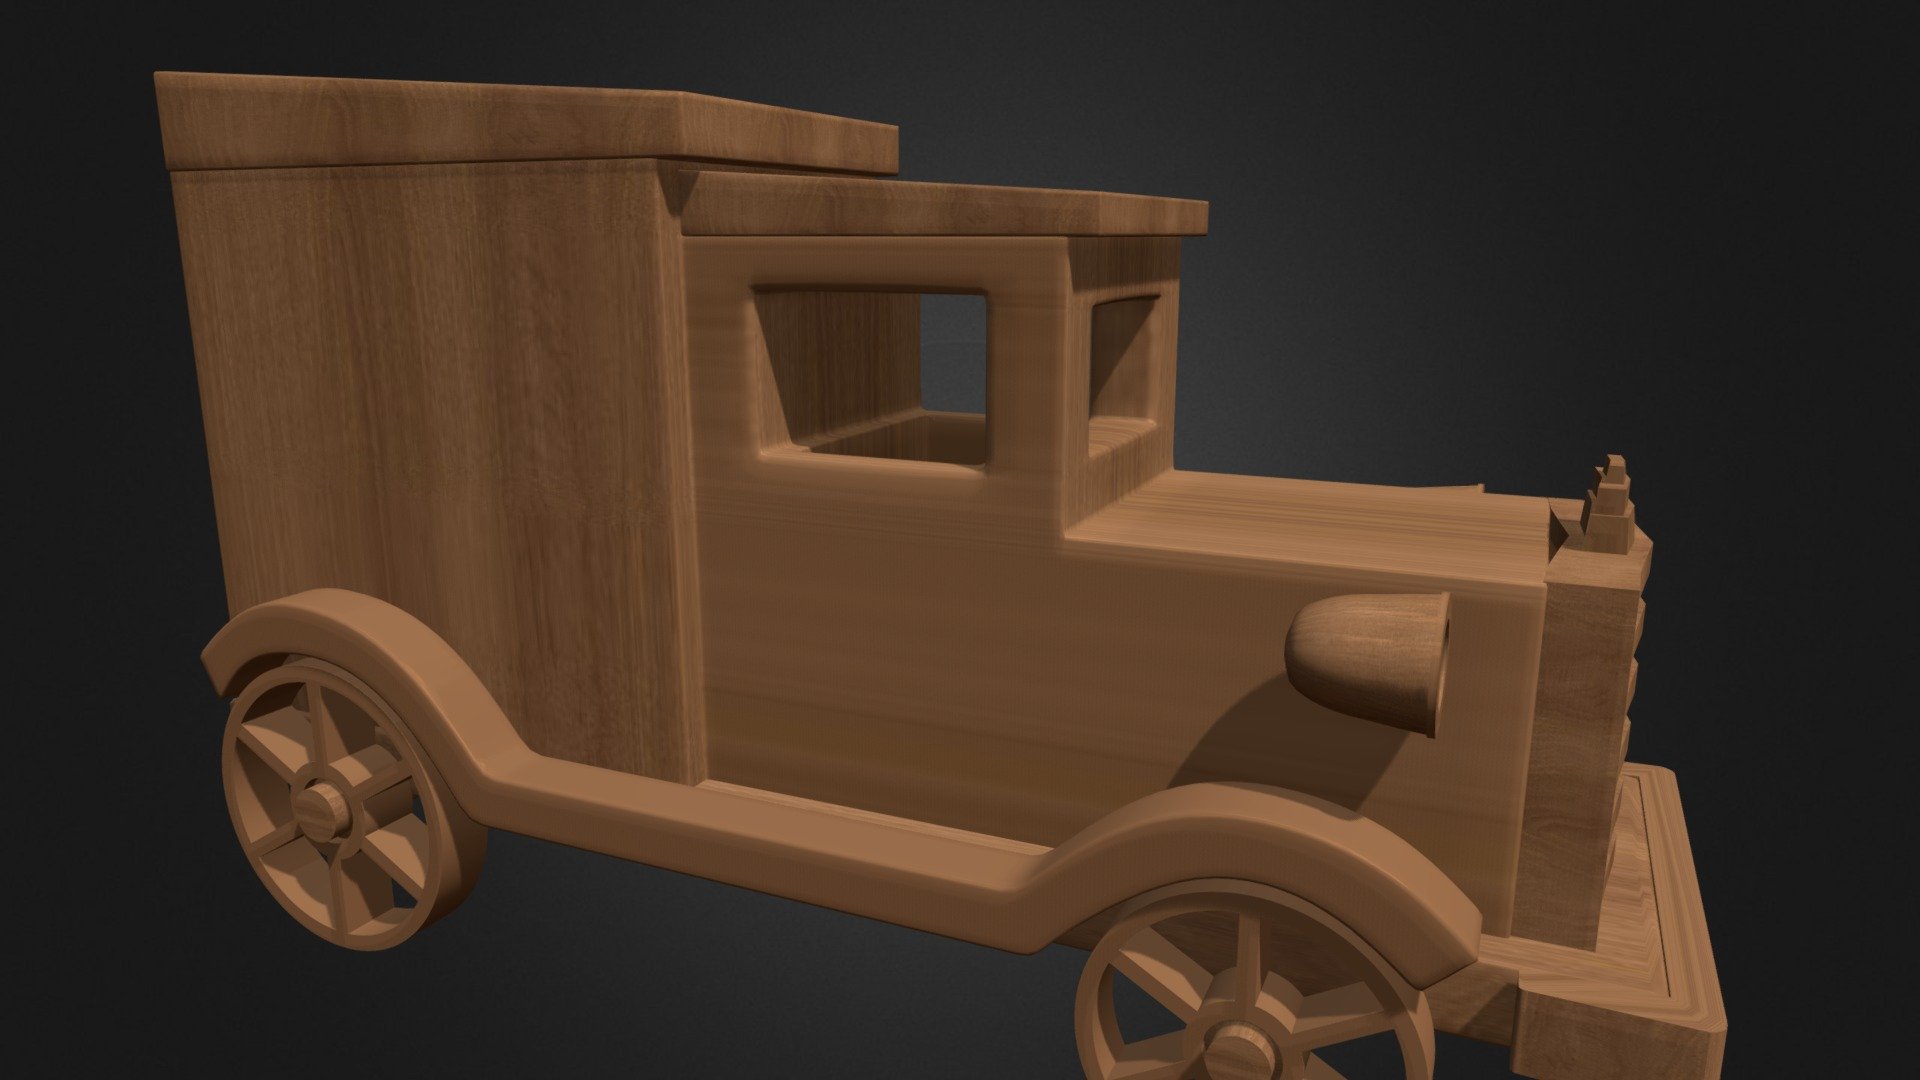 Toy Car modeling without texture.